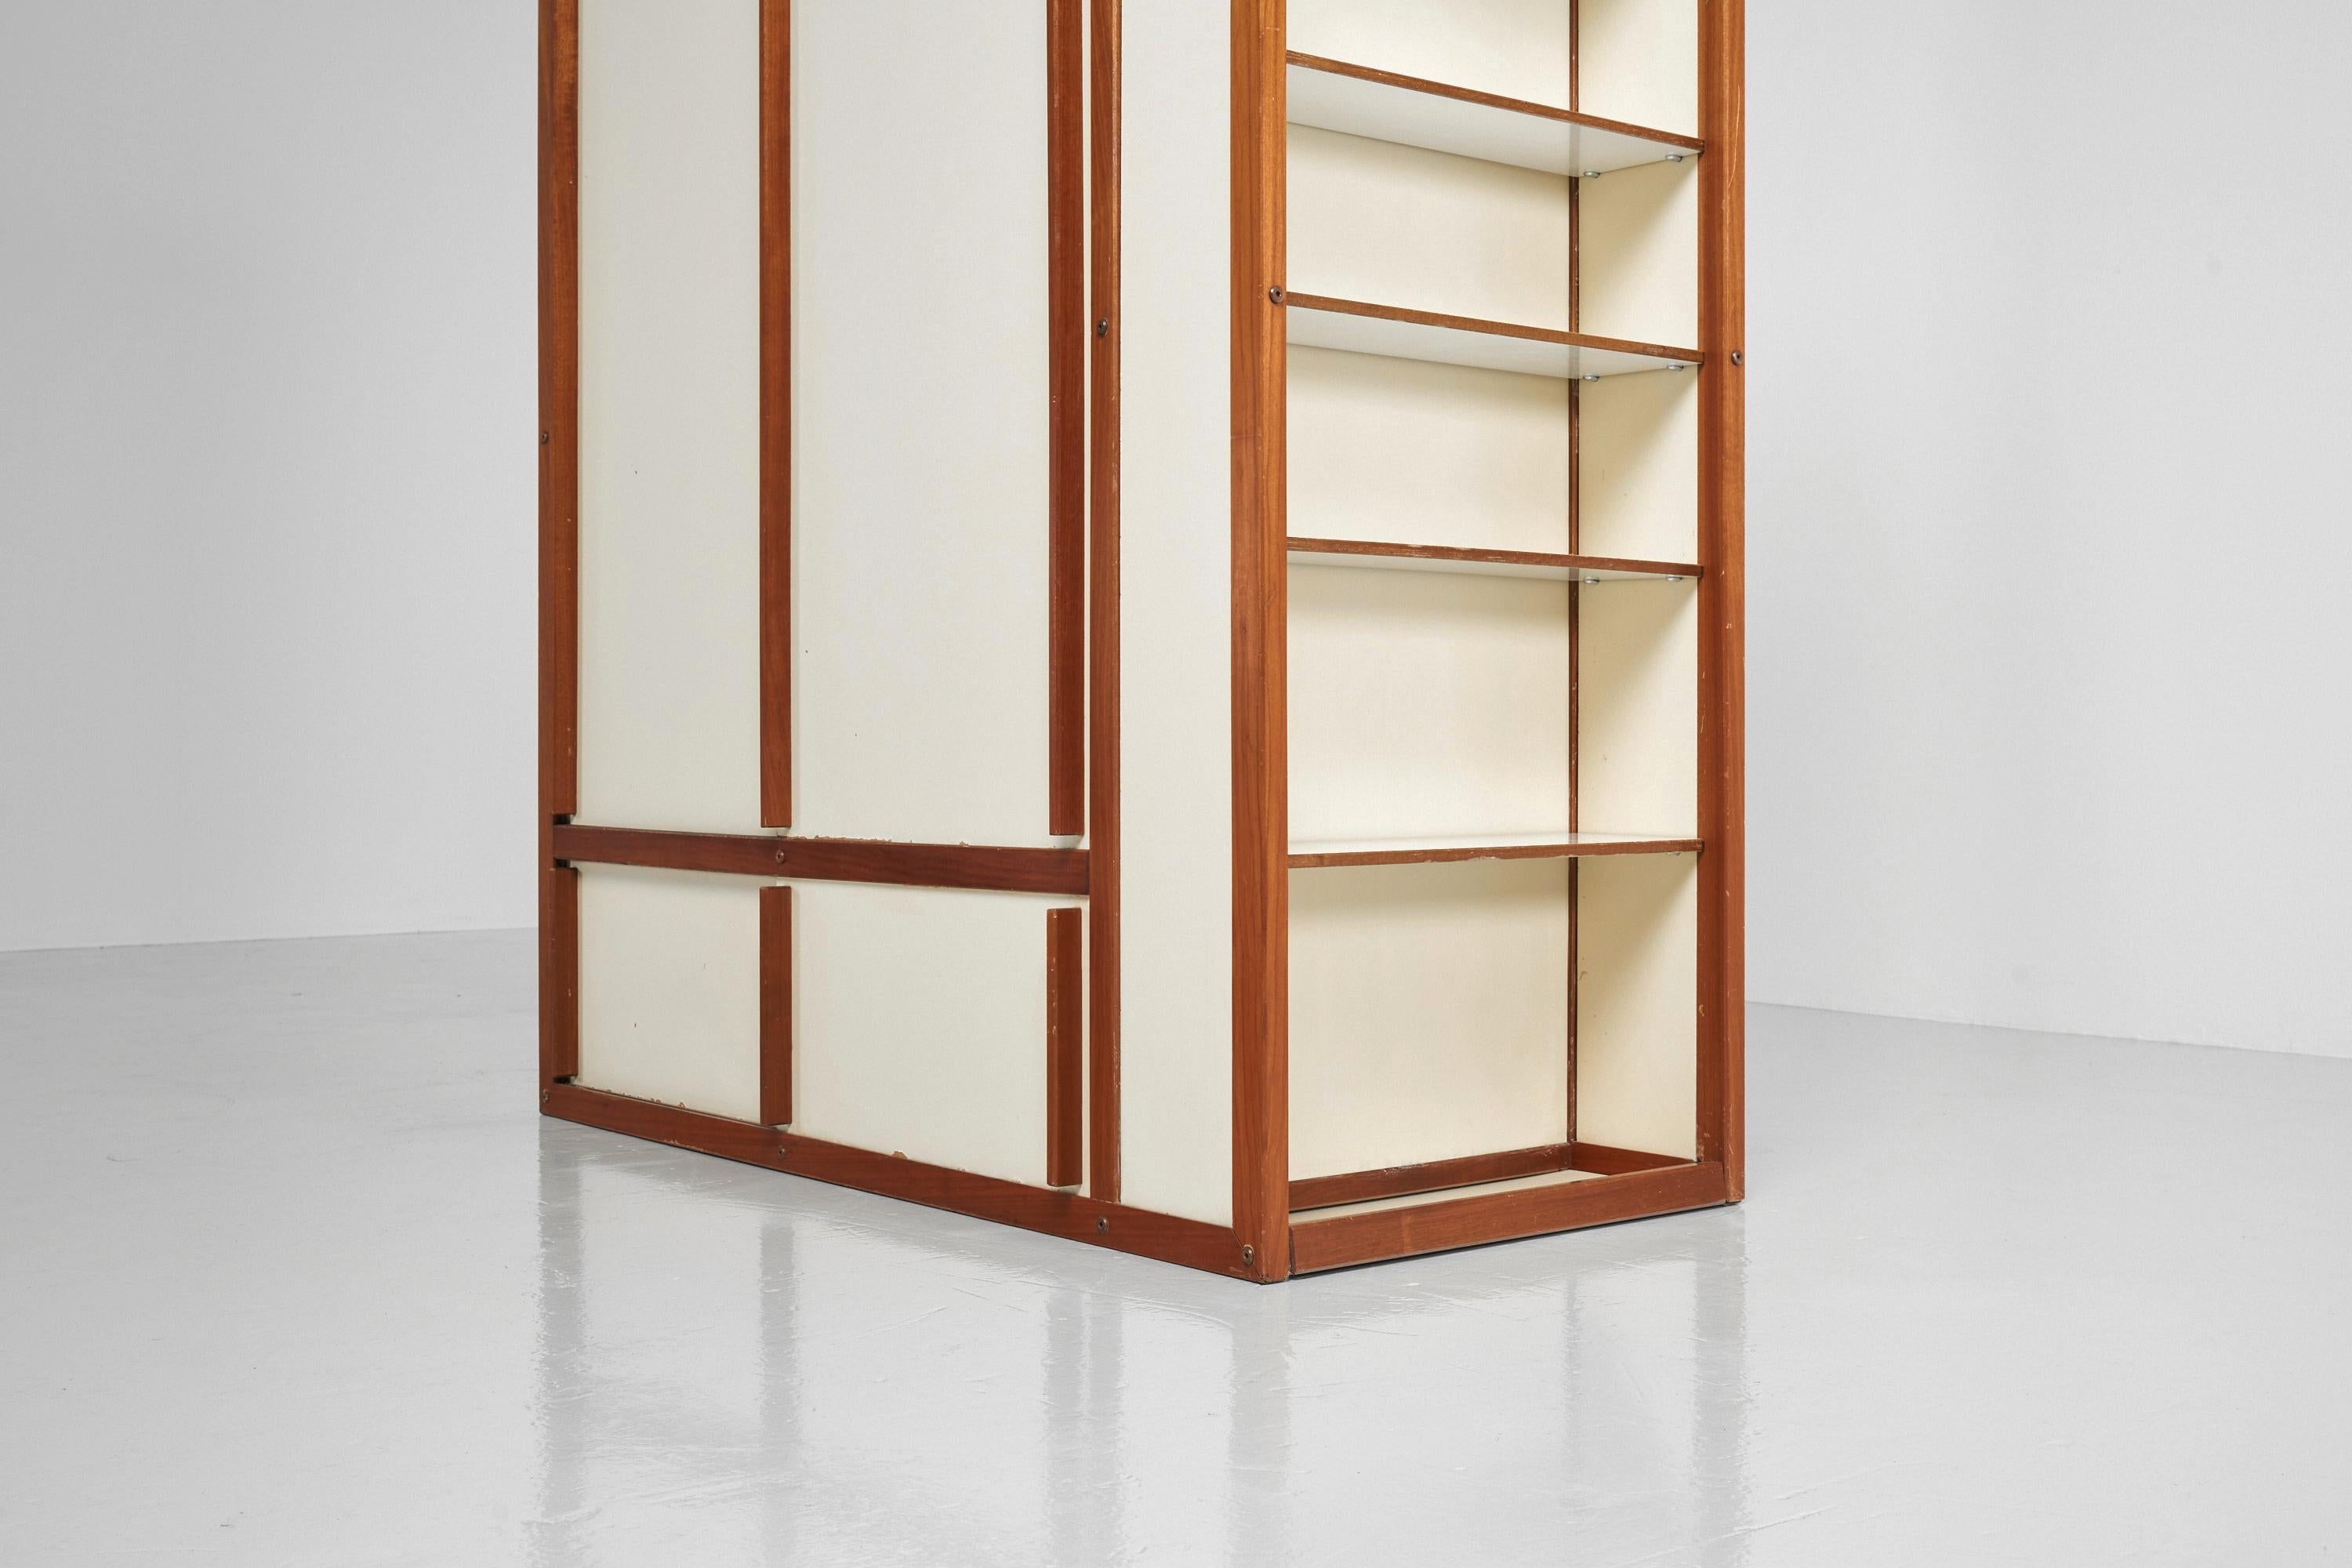 Stunning minimalistic room divider wardrobe designed by cabinet maker Andre Sornay, France 1955. This rare room divider cabinet was designed with his 'tigette system' which was basically a modular formula which he used to make many furniture in